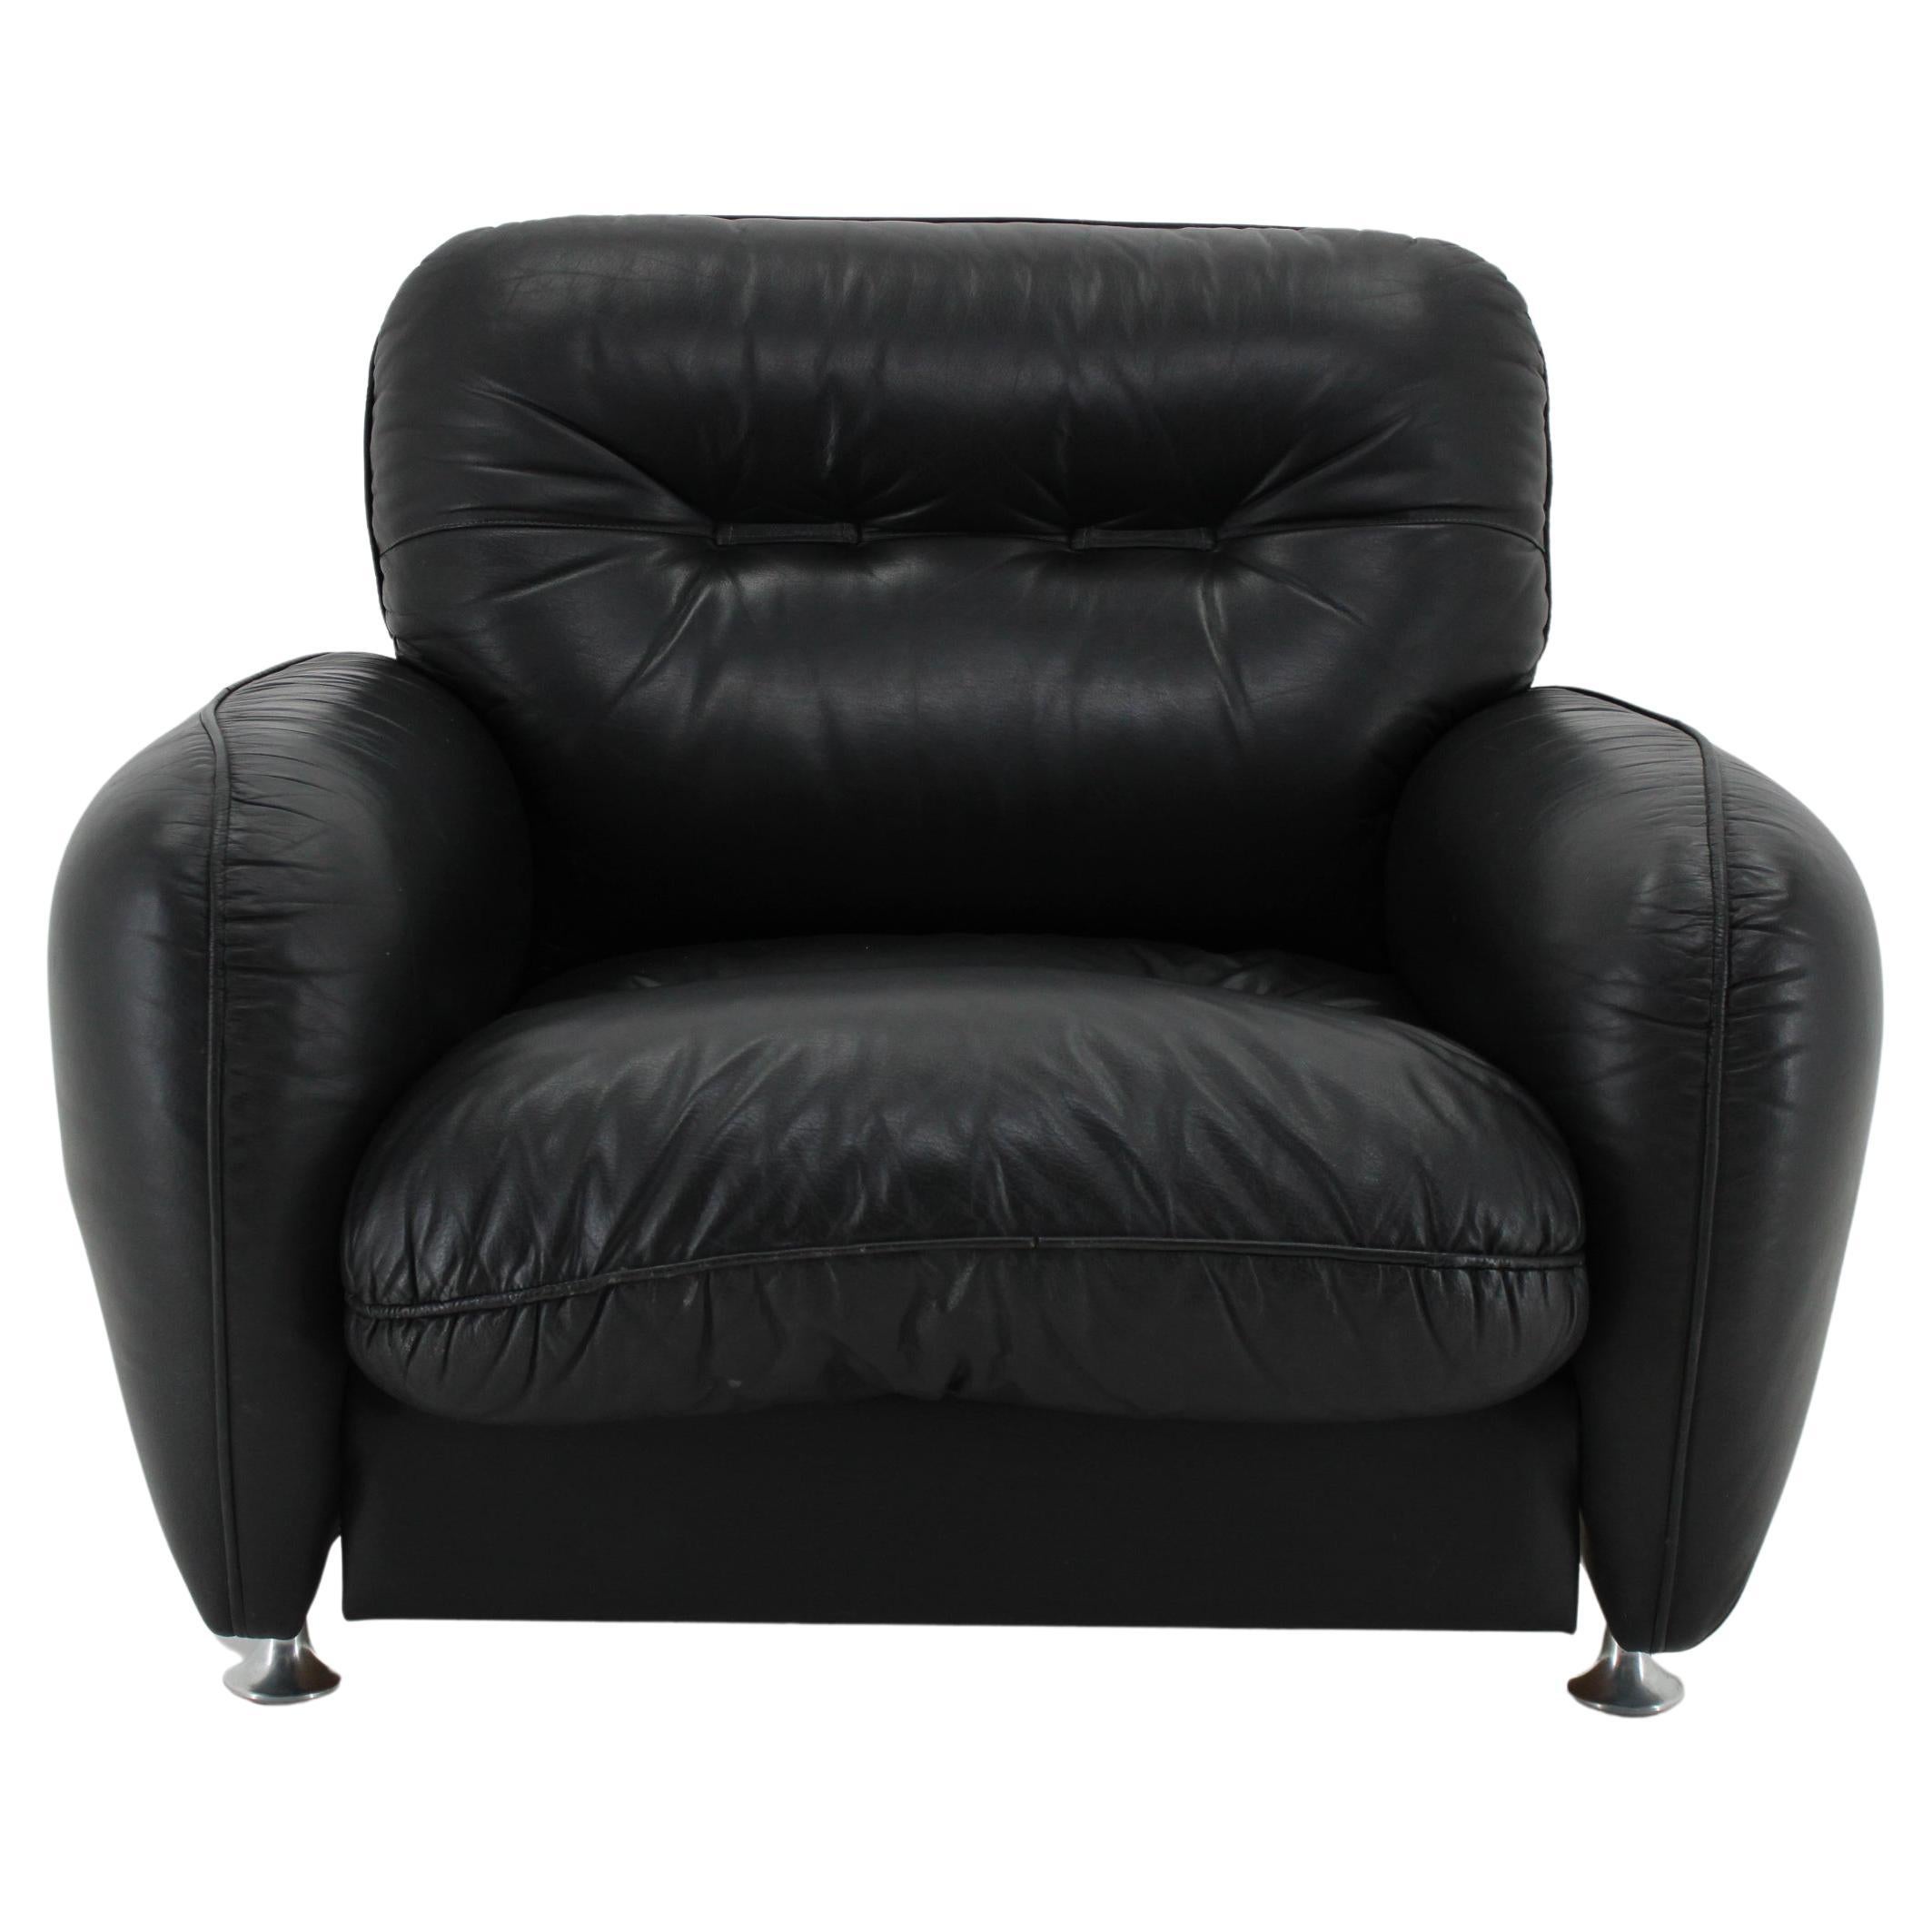 1970s Italian Armchair in Black Leather For Sale